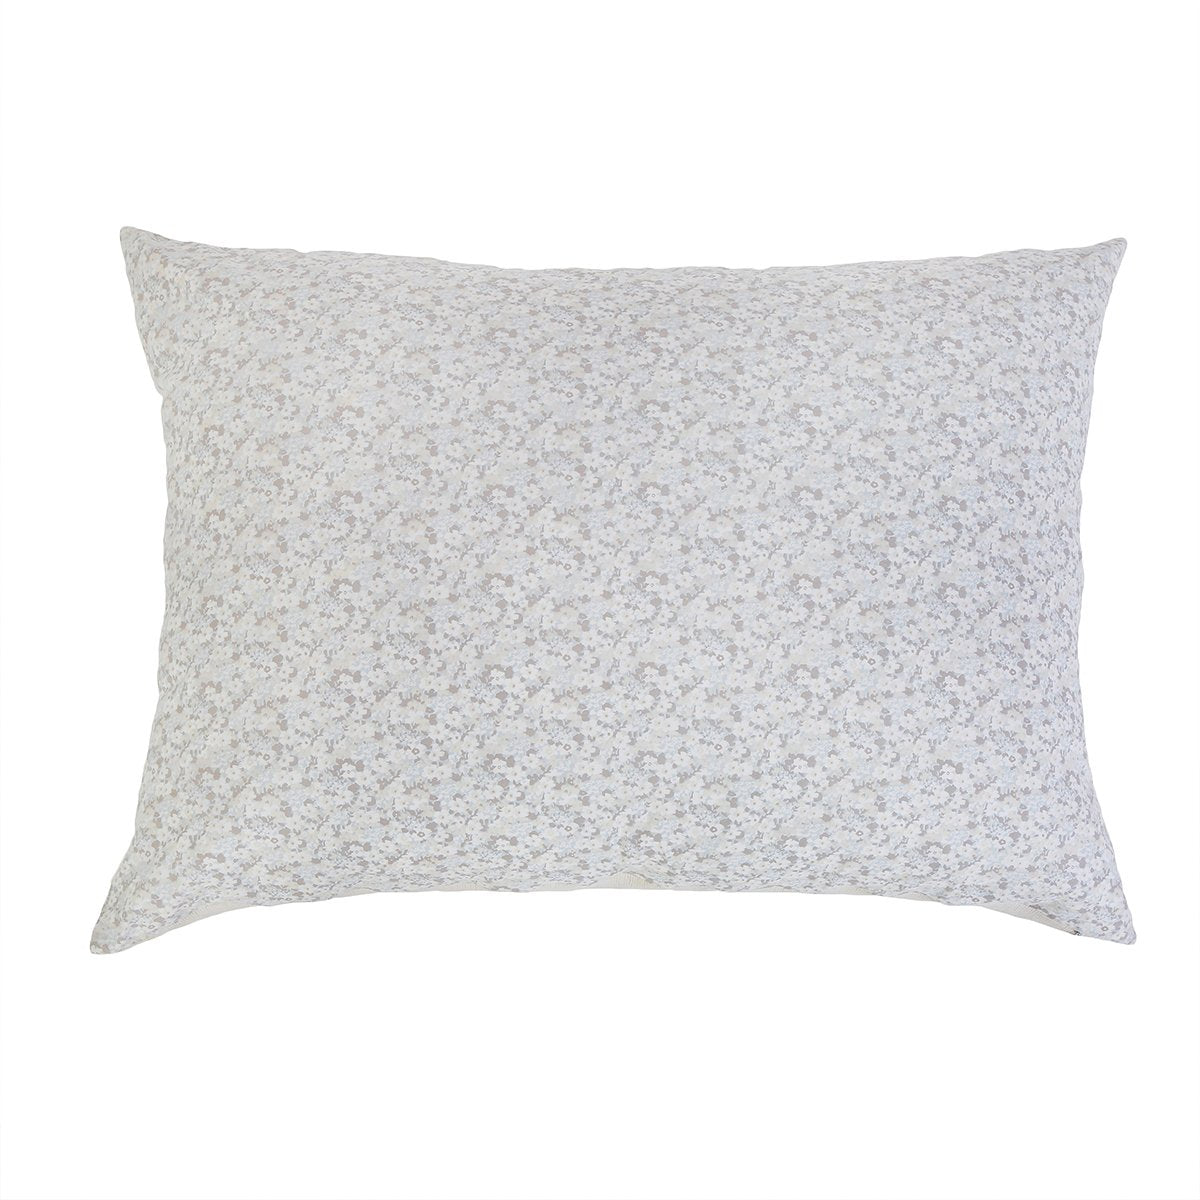 Pom Pom at Home Pillow Insert 28x28 Large Euro